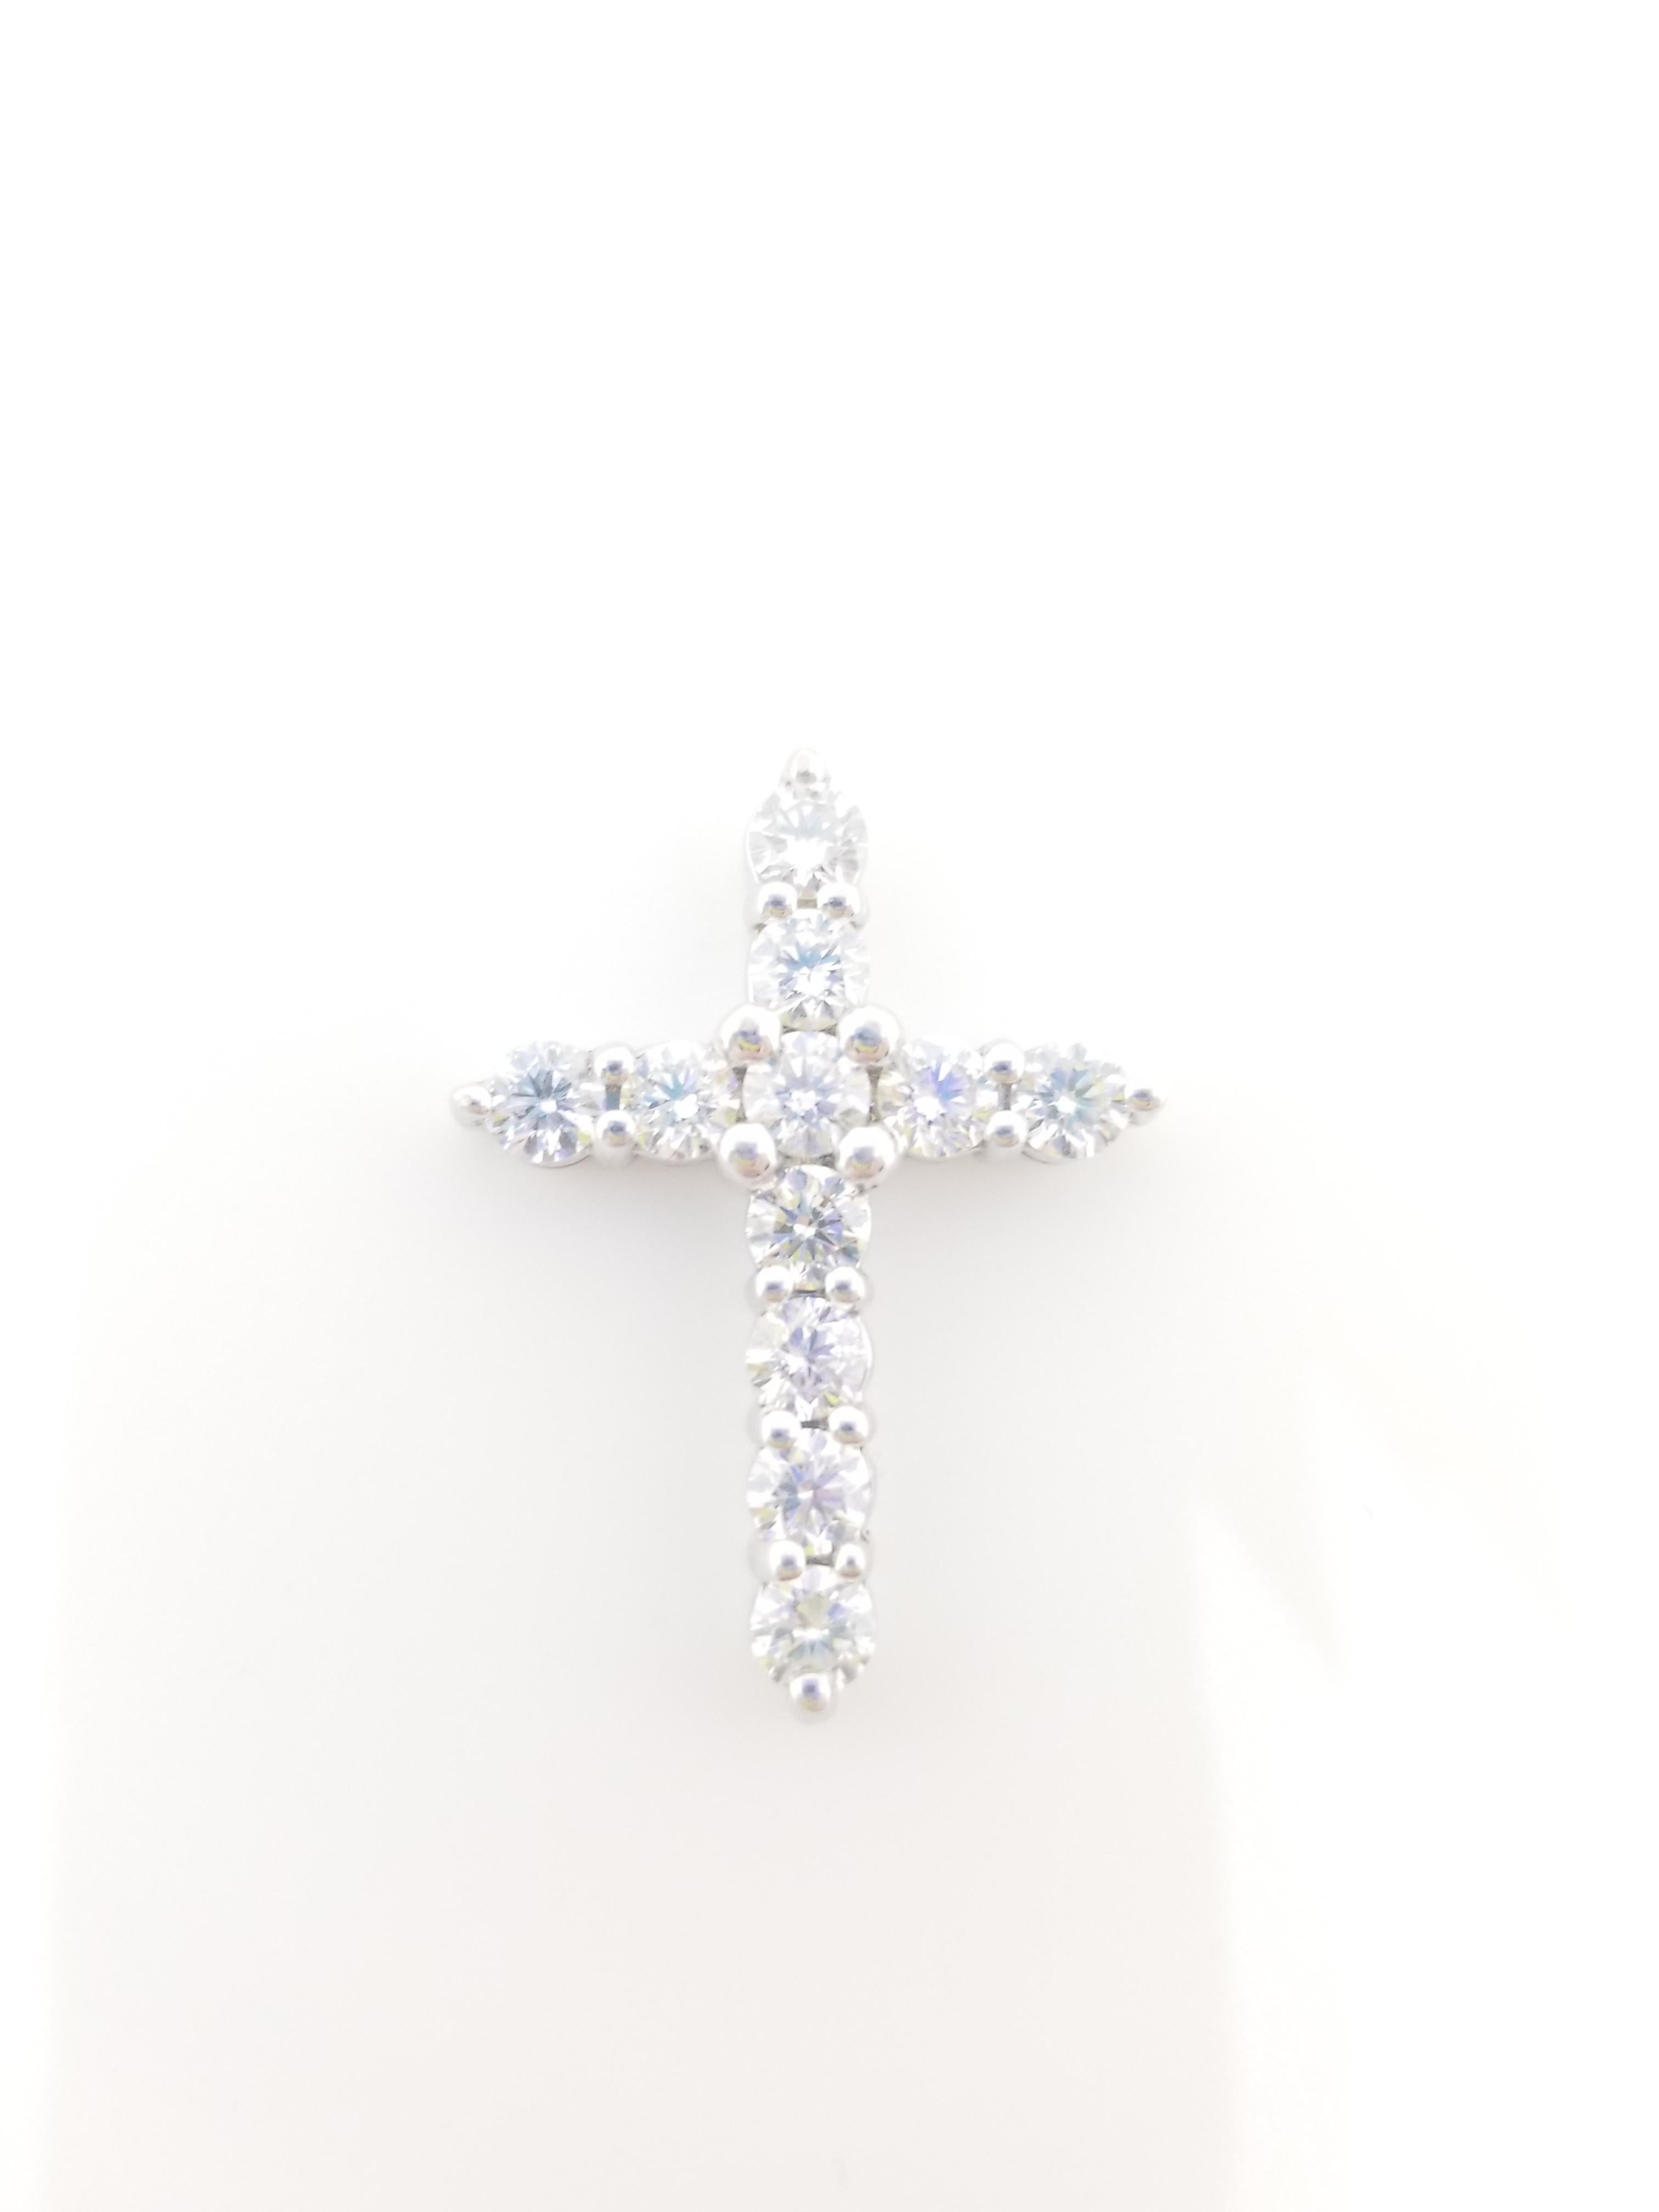 Beautiful 14K white gold and diamond cross pendant. A total weight of 2.12CTS round cut diamonds very sparkly and shiny look.